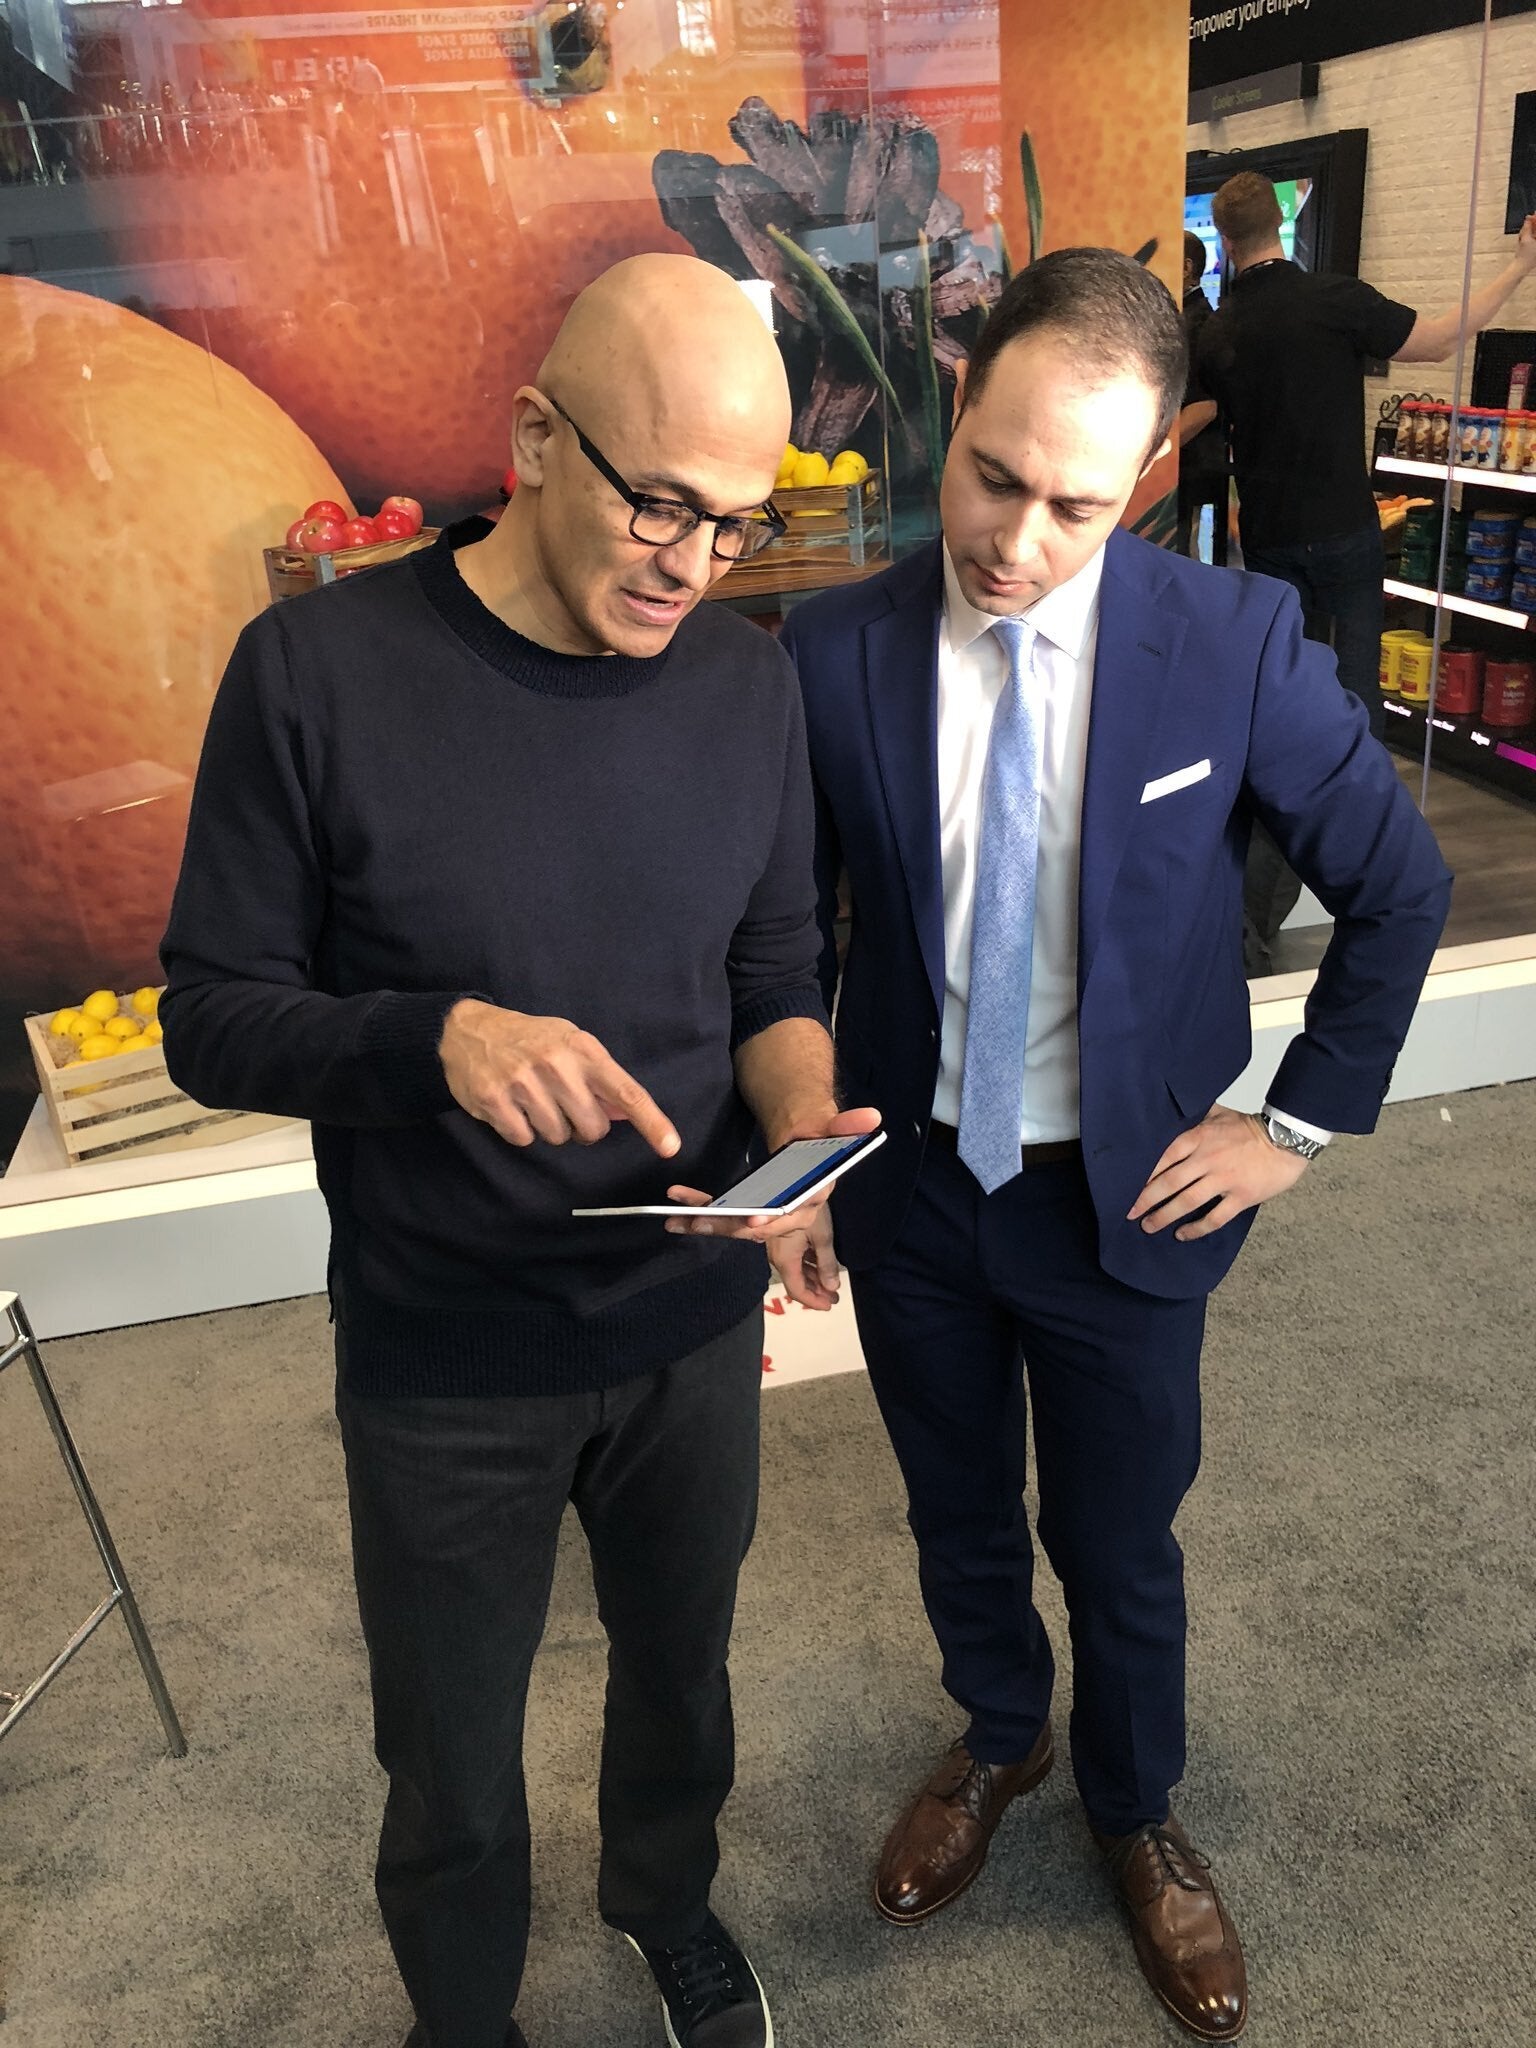 Microsoft CEO Satya Nadella showing off his Surface Duo device - Dual-screened Surface Duo gets photo opp with Microsoft's CEO Nadella